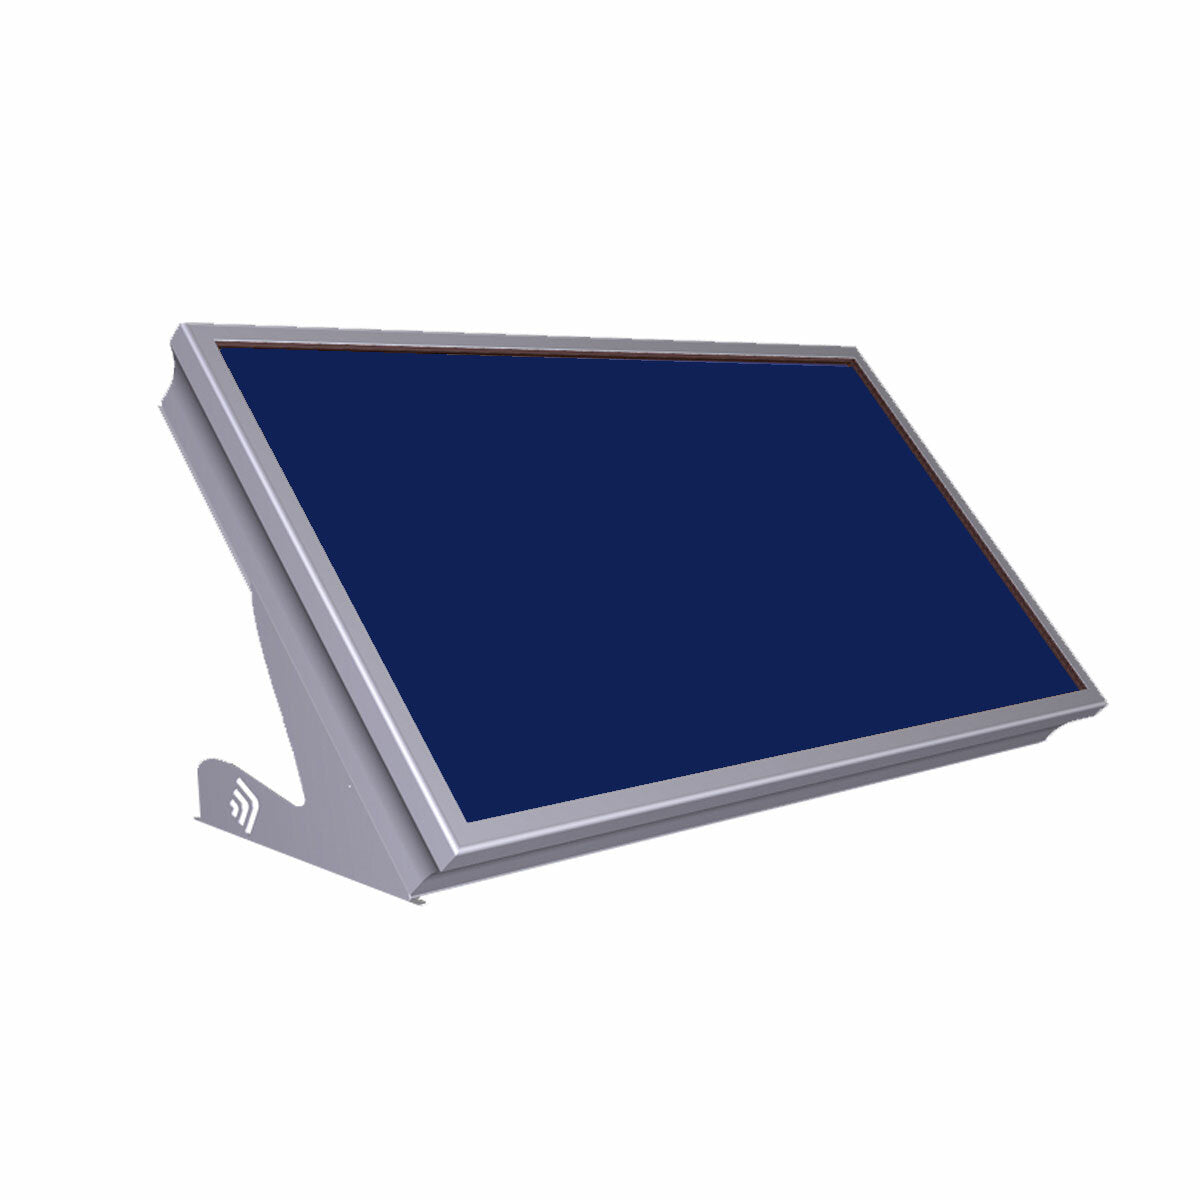 Cordivari Stratos DR 150 natural circulation solar panel for flat and pitched roof 140 liters